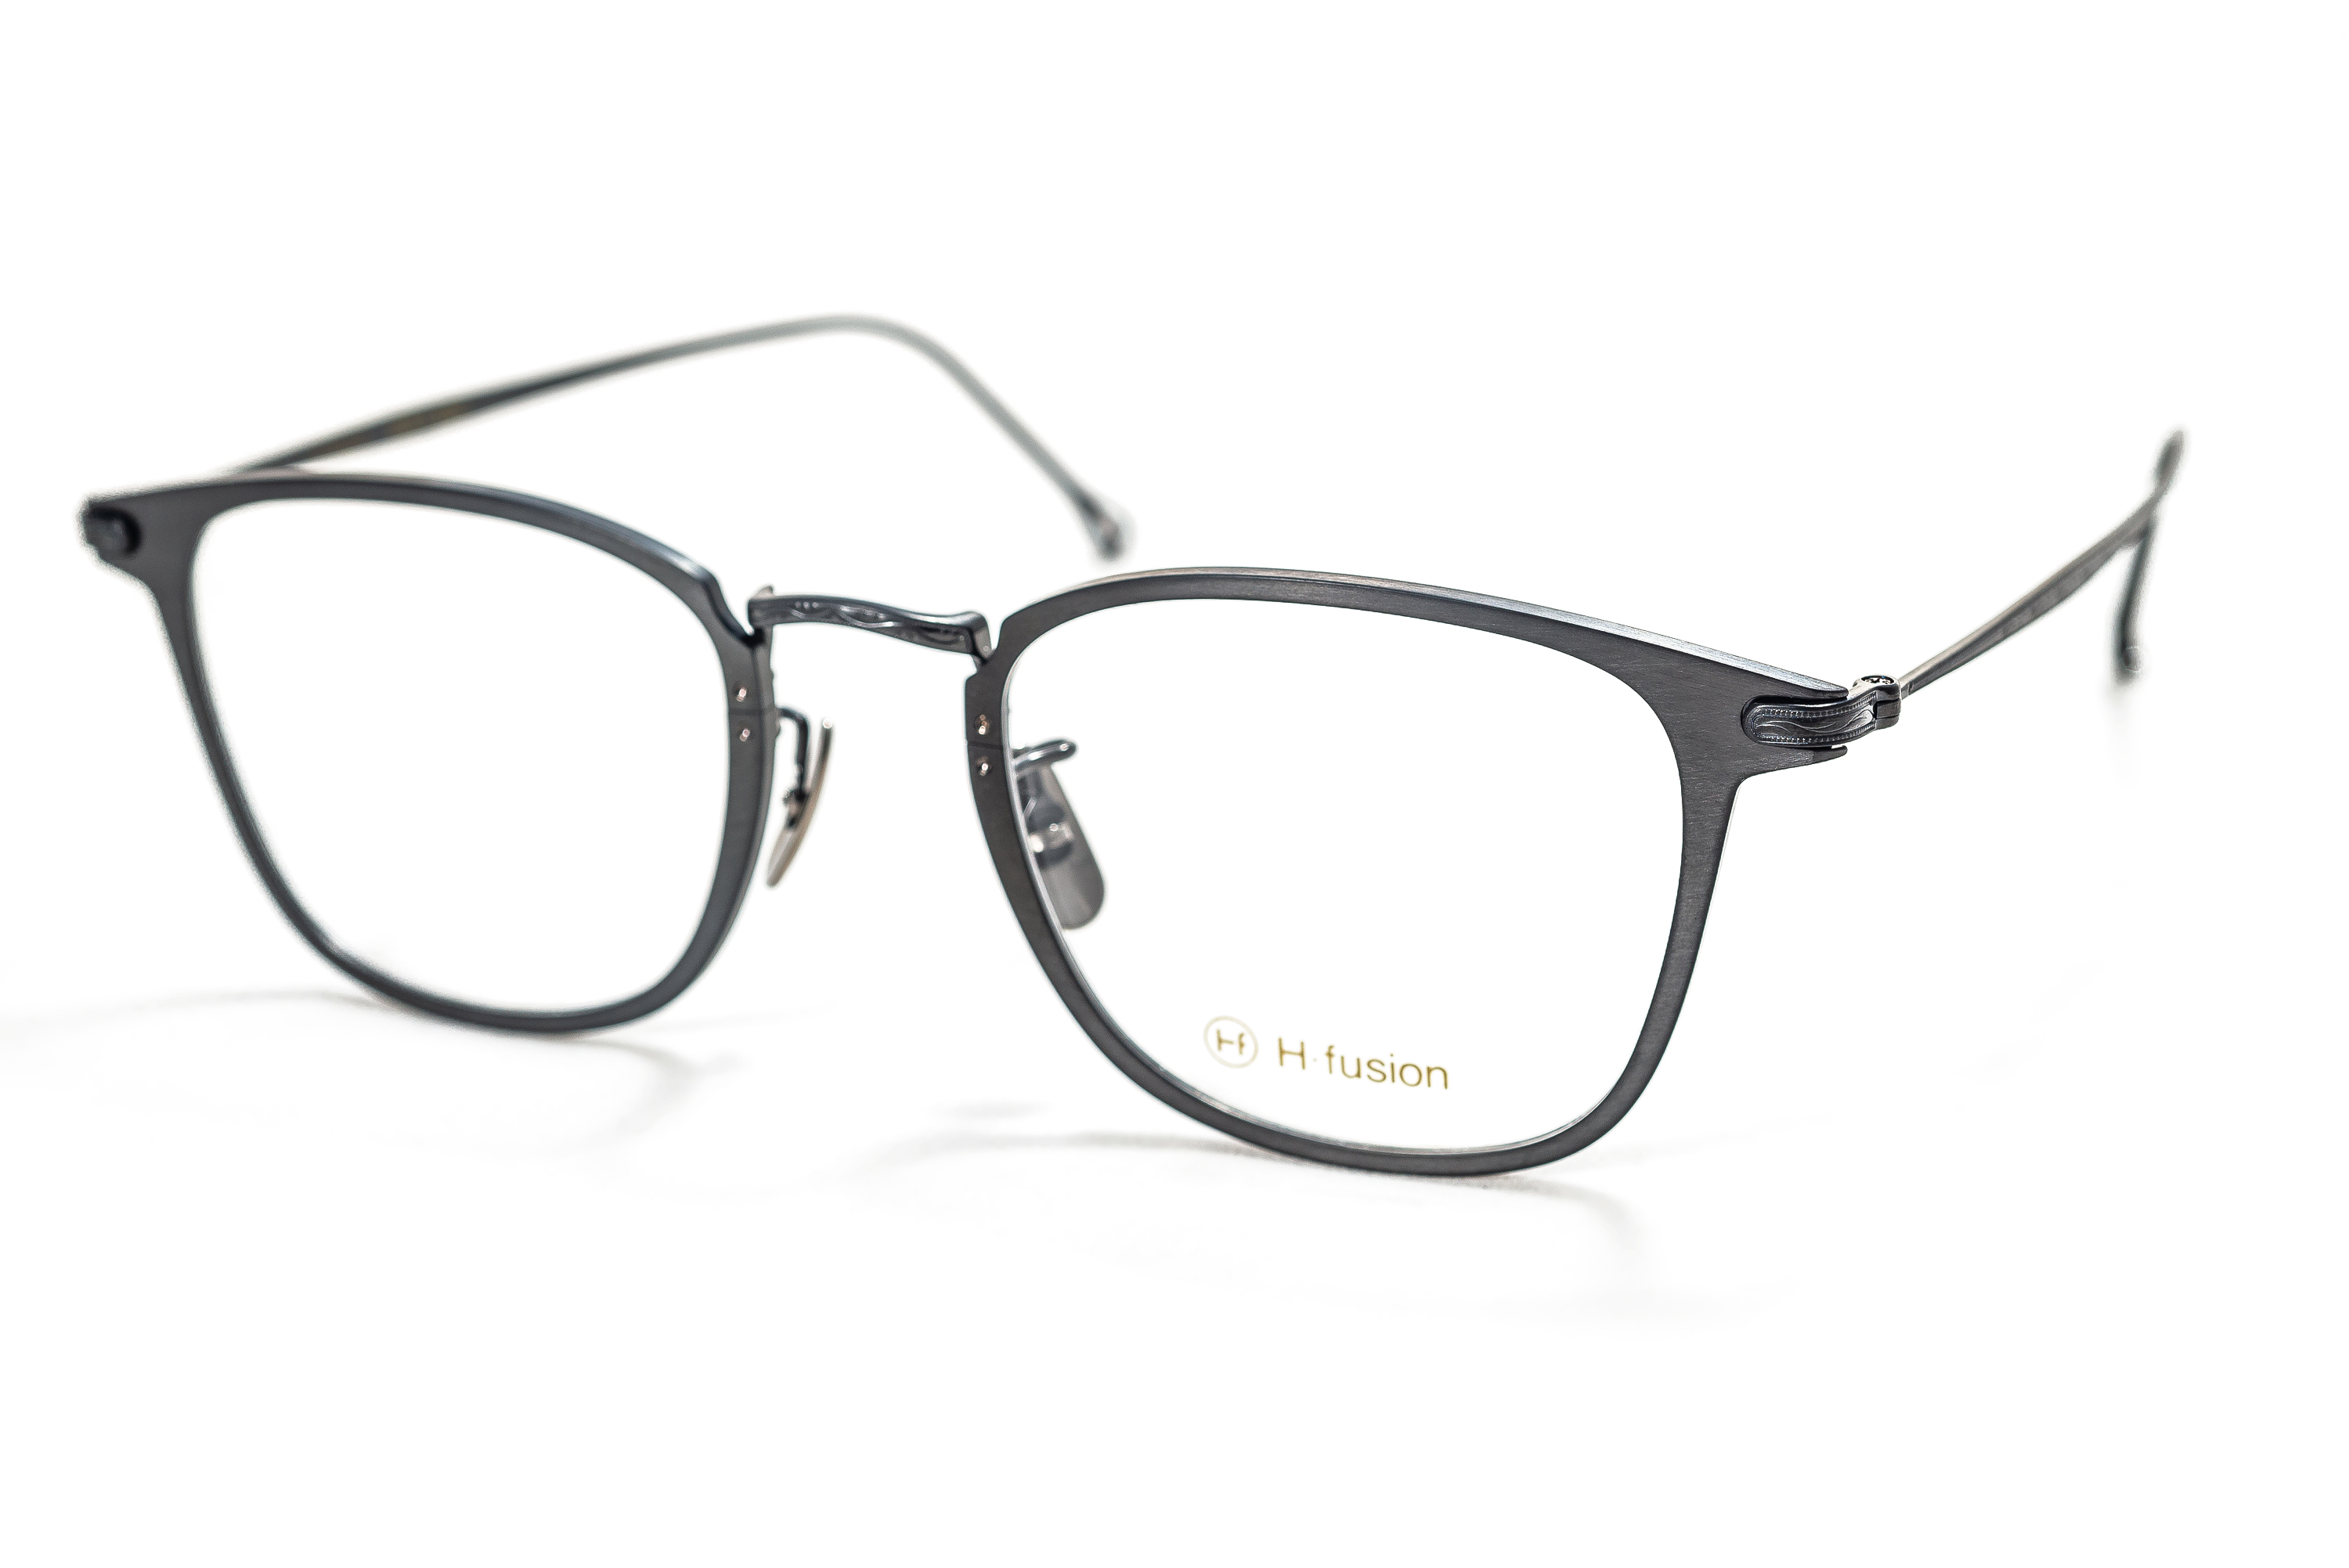 H-fusion - HF-503-COL-01- The New Black Optical